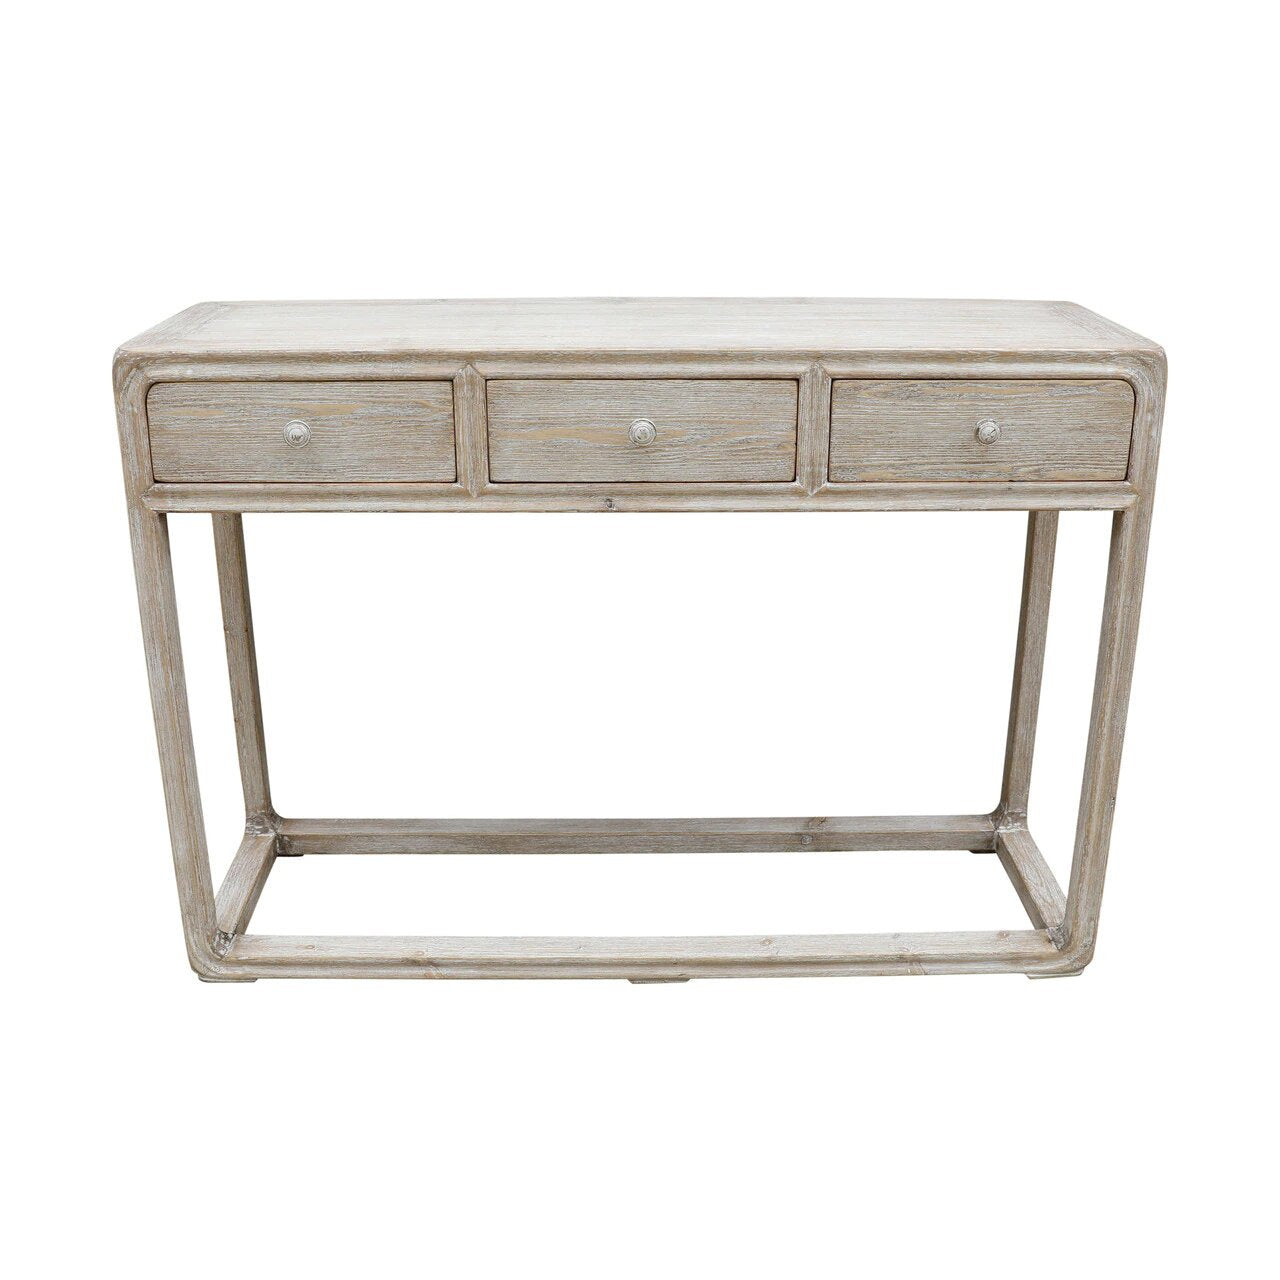 Peking Console Table With 3 Drawers-Weathered White Wash Small ( Handmade ).